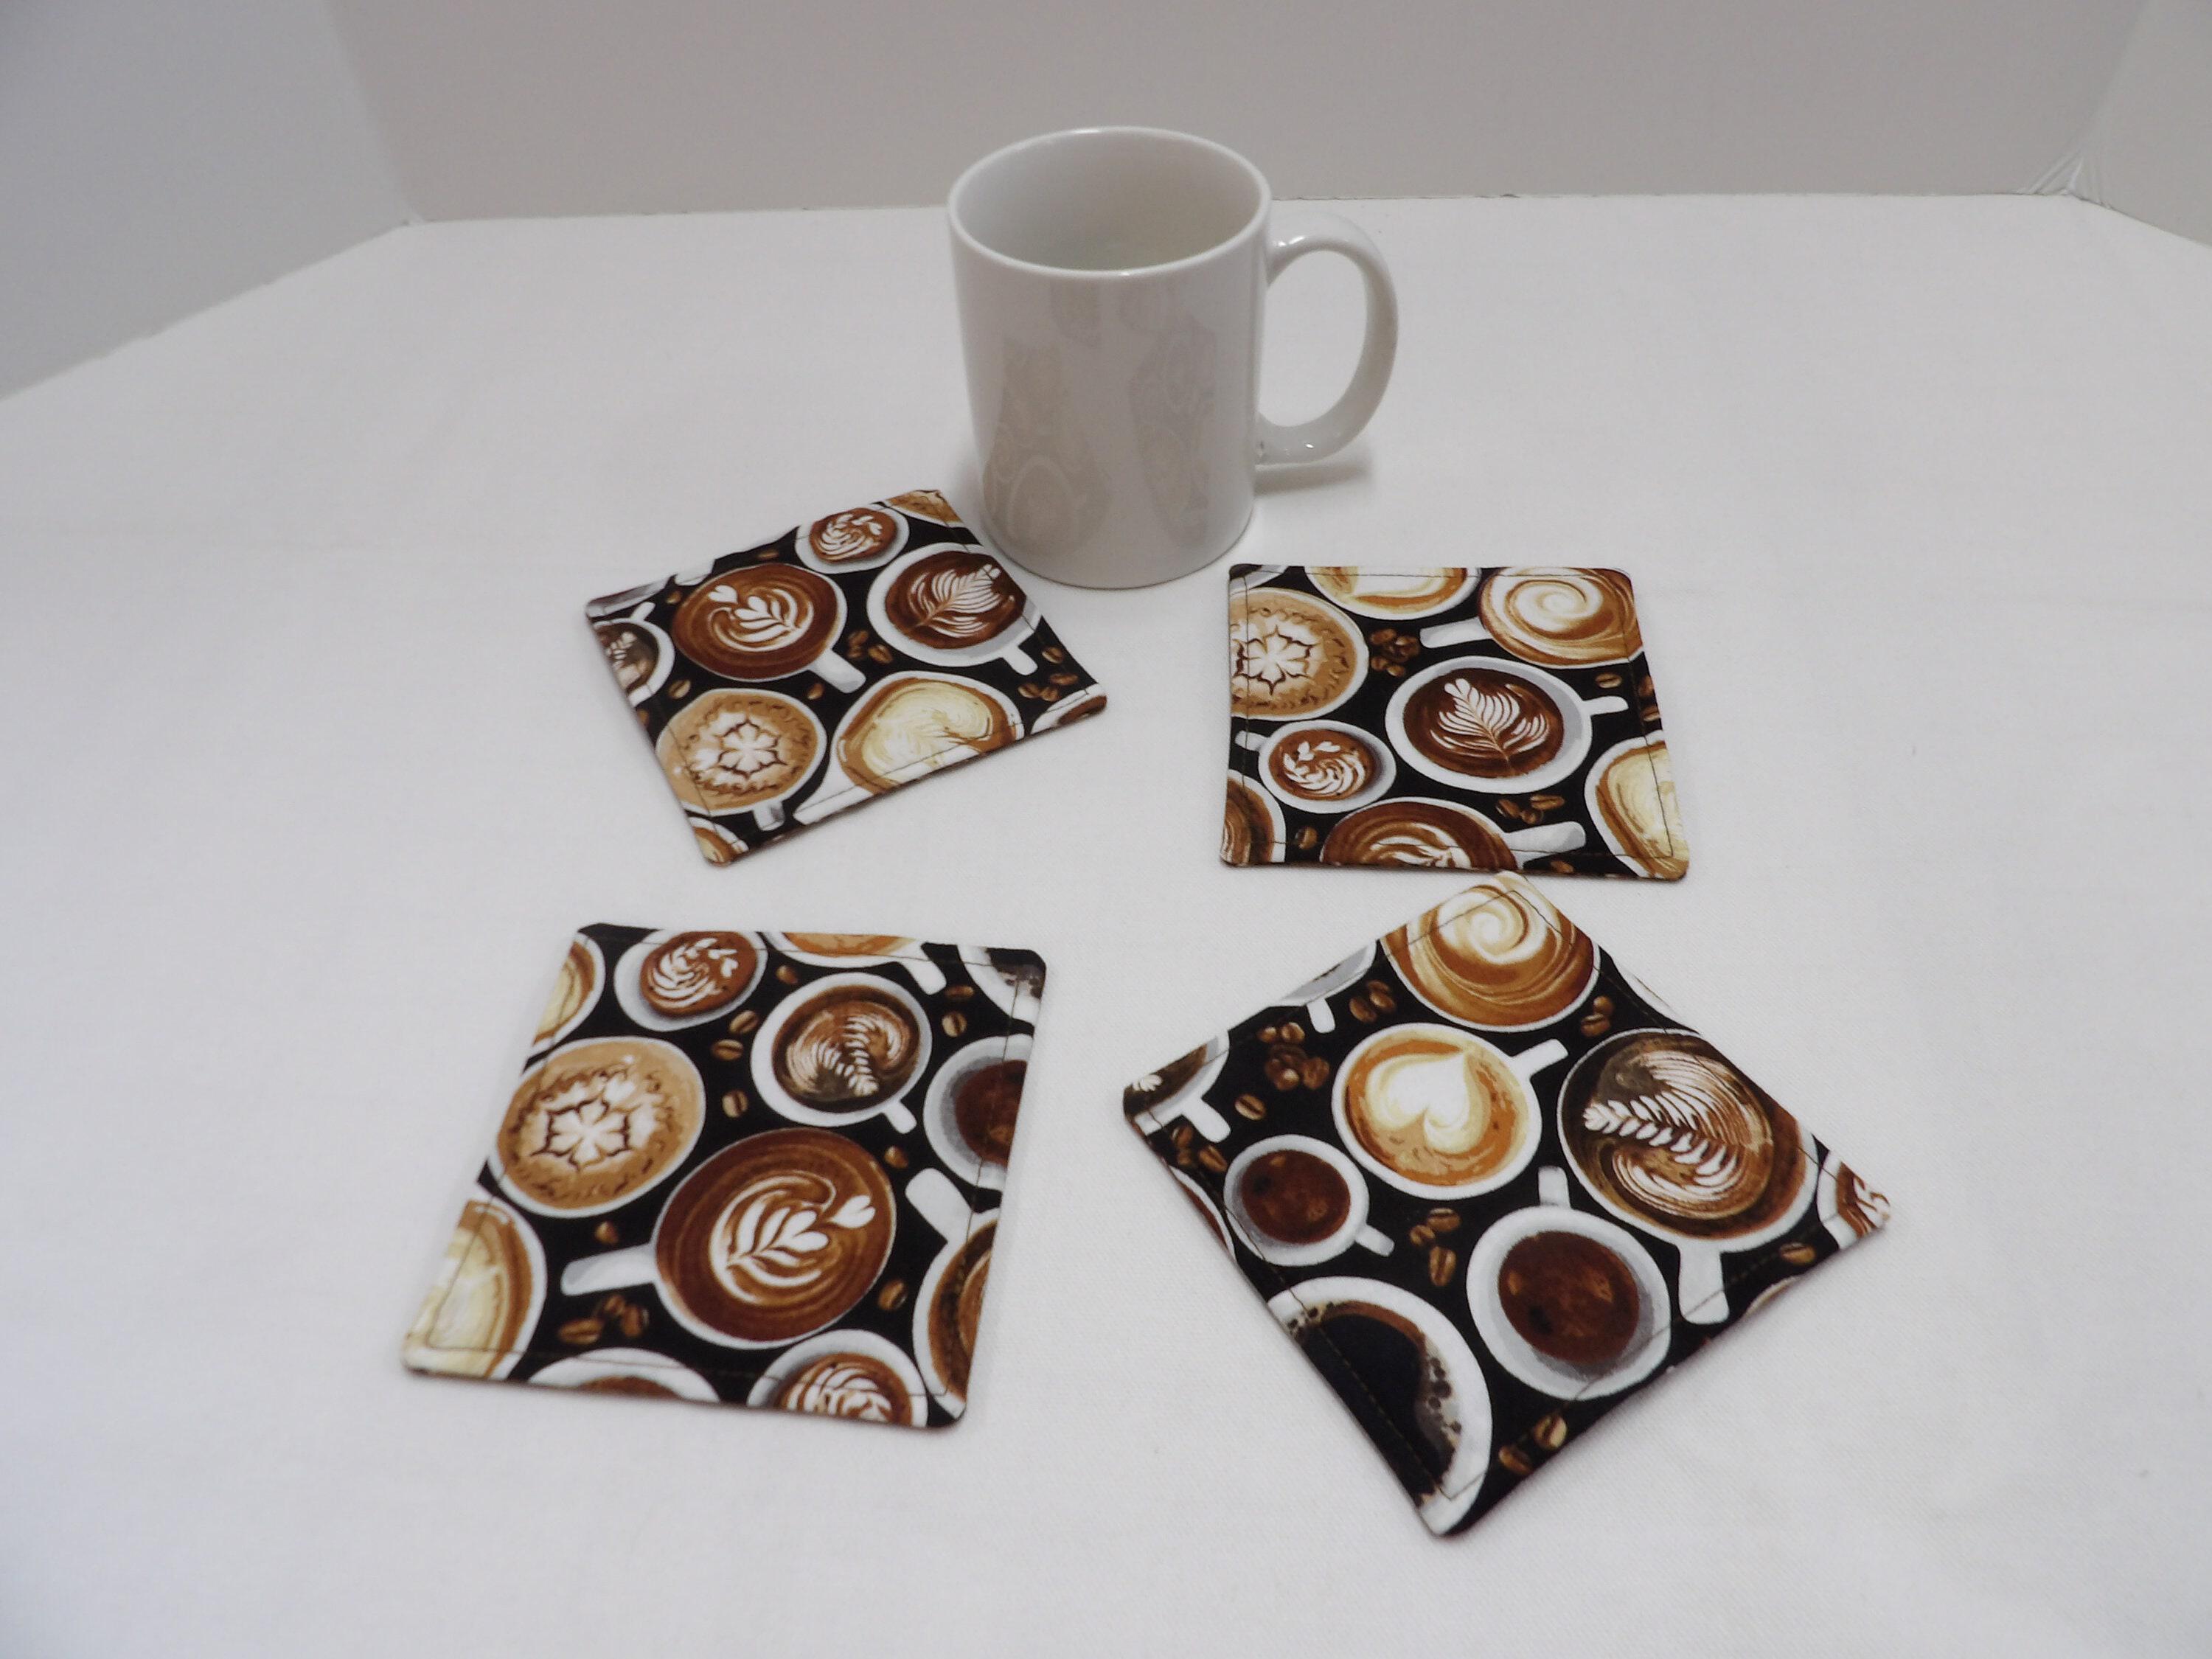 Products :: 997 Hanging dish towels with fancy coffee theme. You choose  color, quantity; Designer Coffee kitchen towels. Kitchen decor gifts, coffee  bar